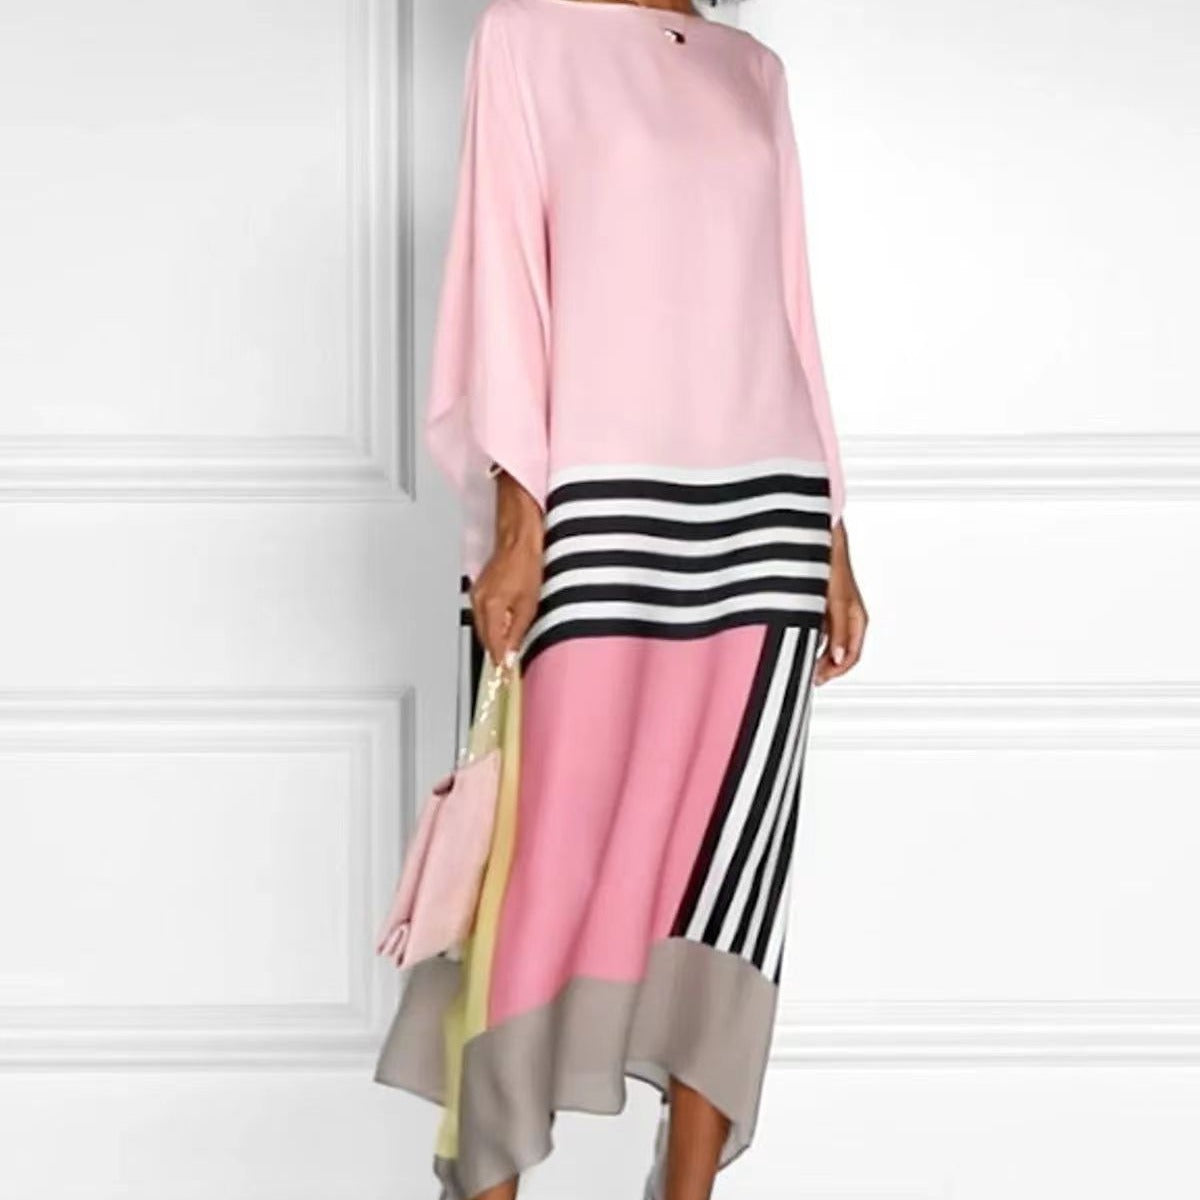 women's pink dress with black & white stripes and gray bottom